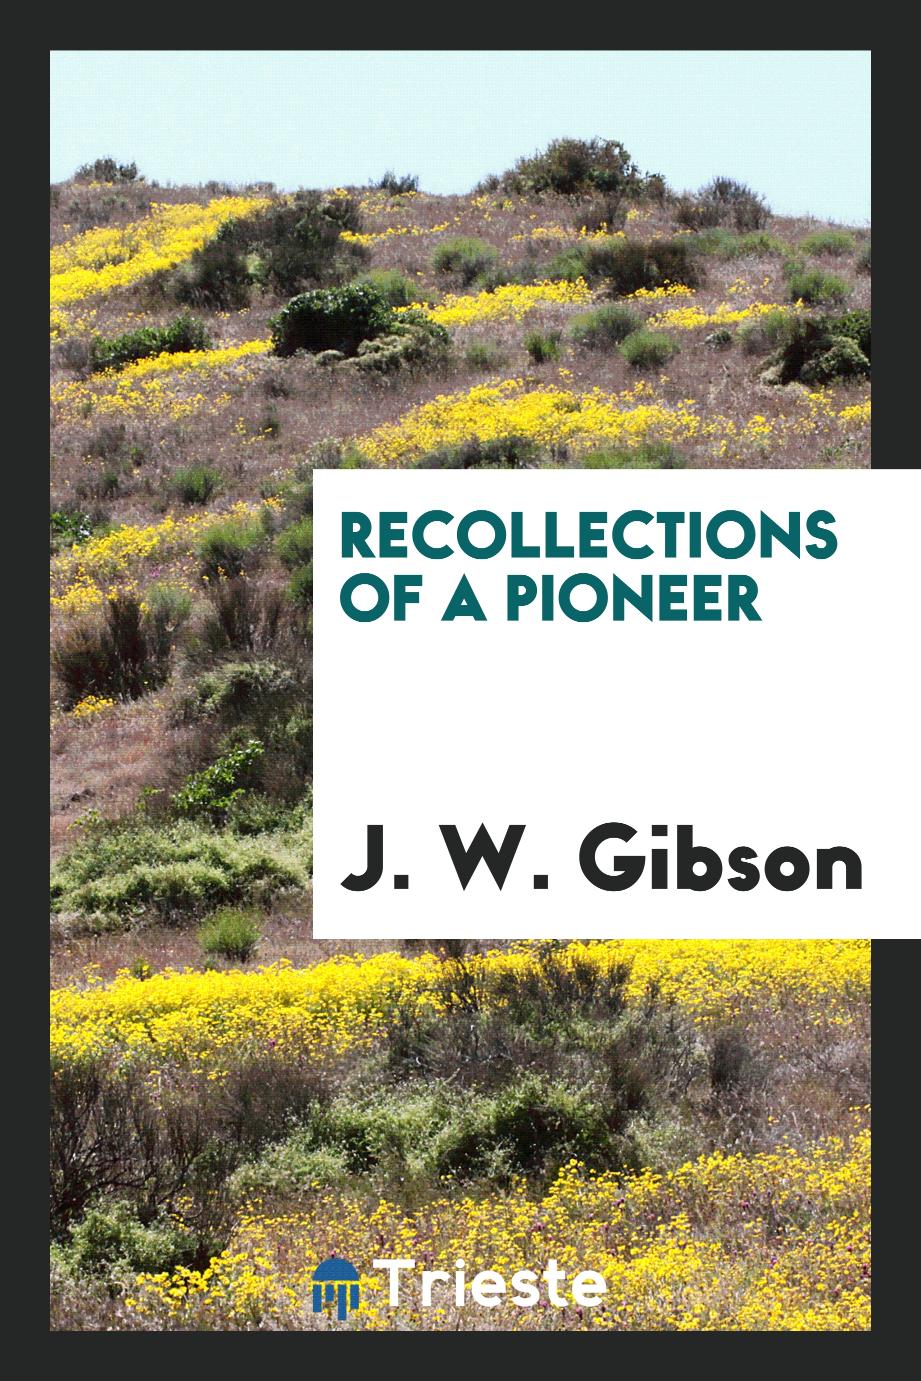 Recollections of a pioneer